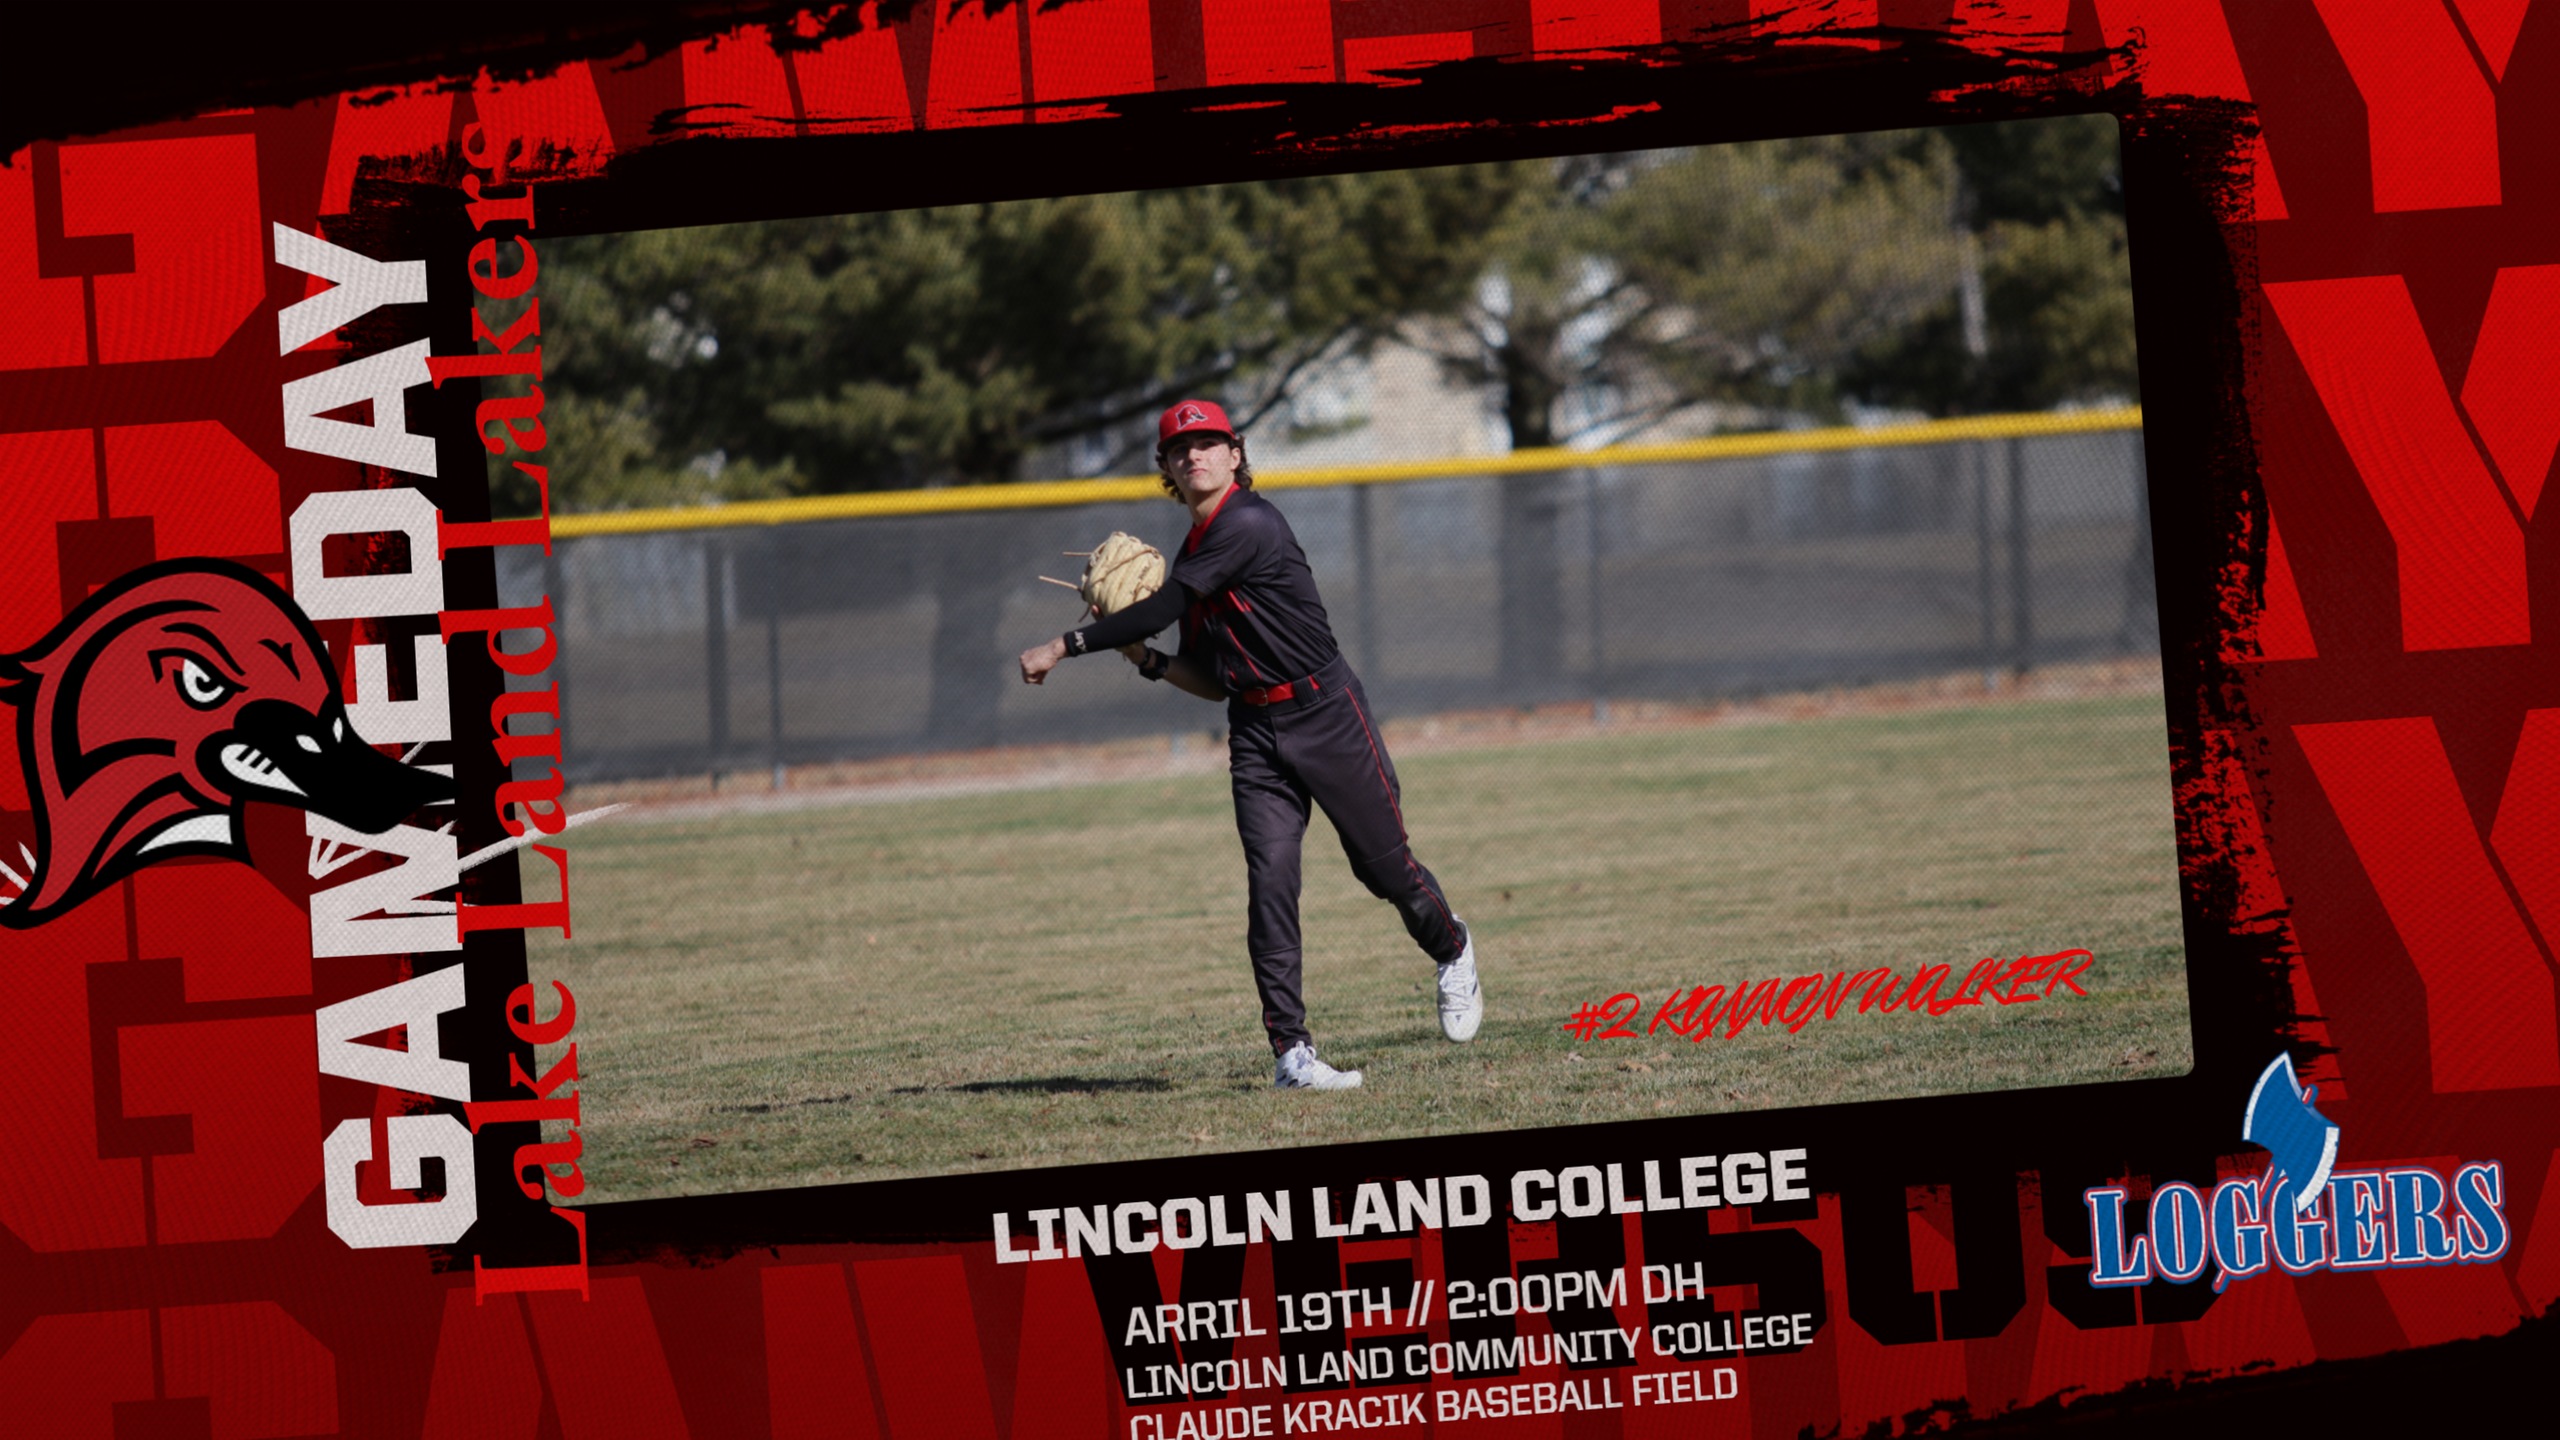 Lakers are set for some Non-Conference Action with the Loggers of Lincoln Land CC